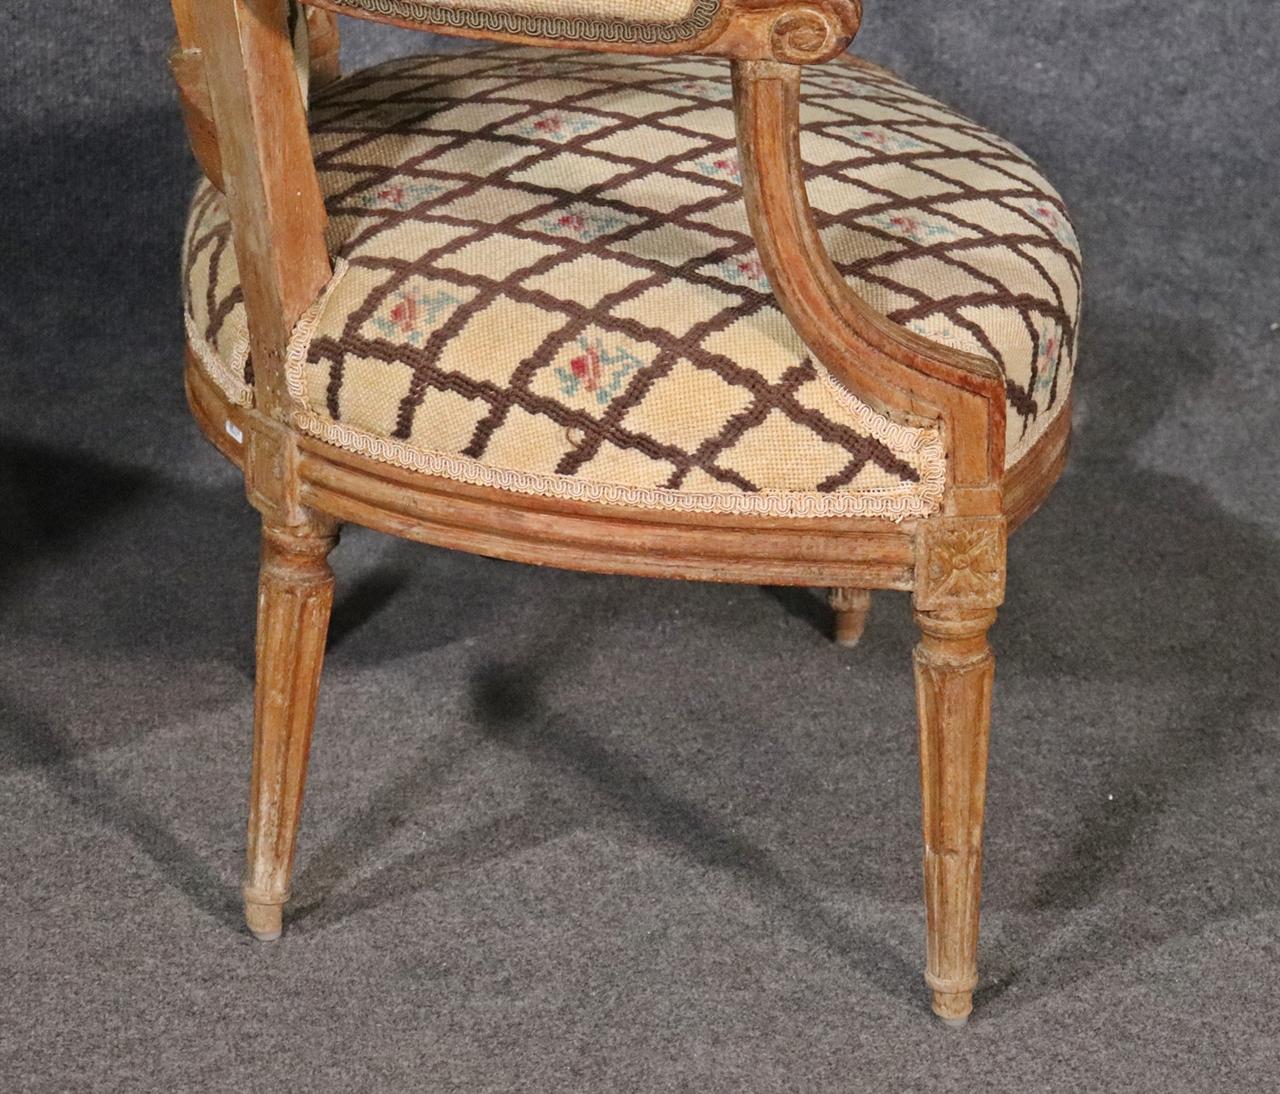 Companion Pair of Nearly Identical French Louis XVI Armchairs, Circa 1900 For Sale 5